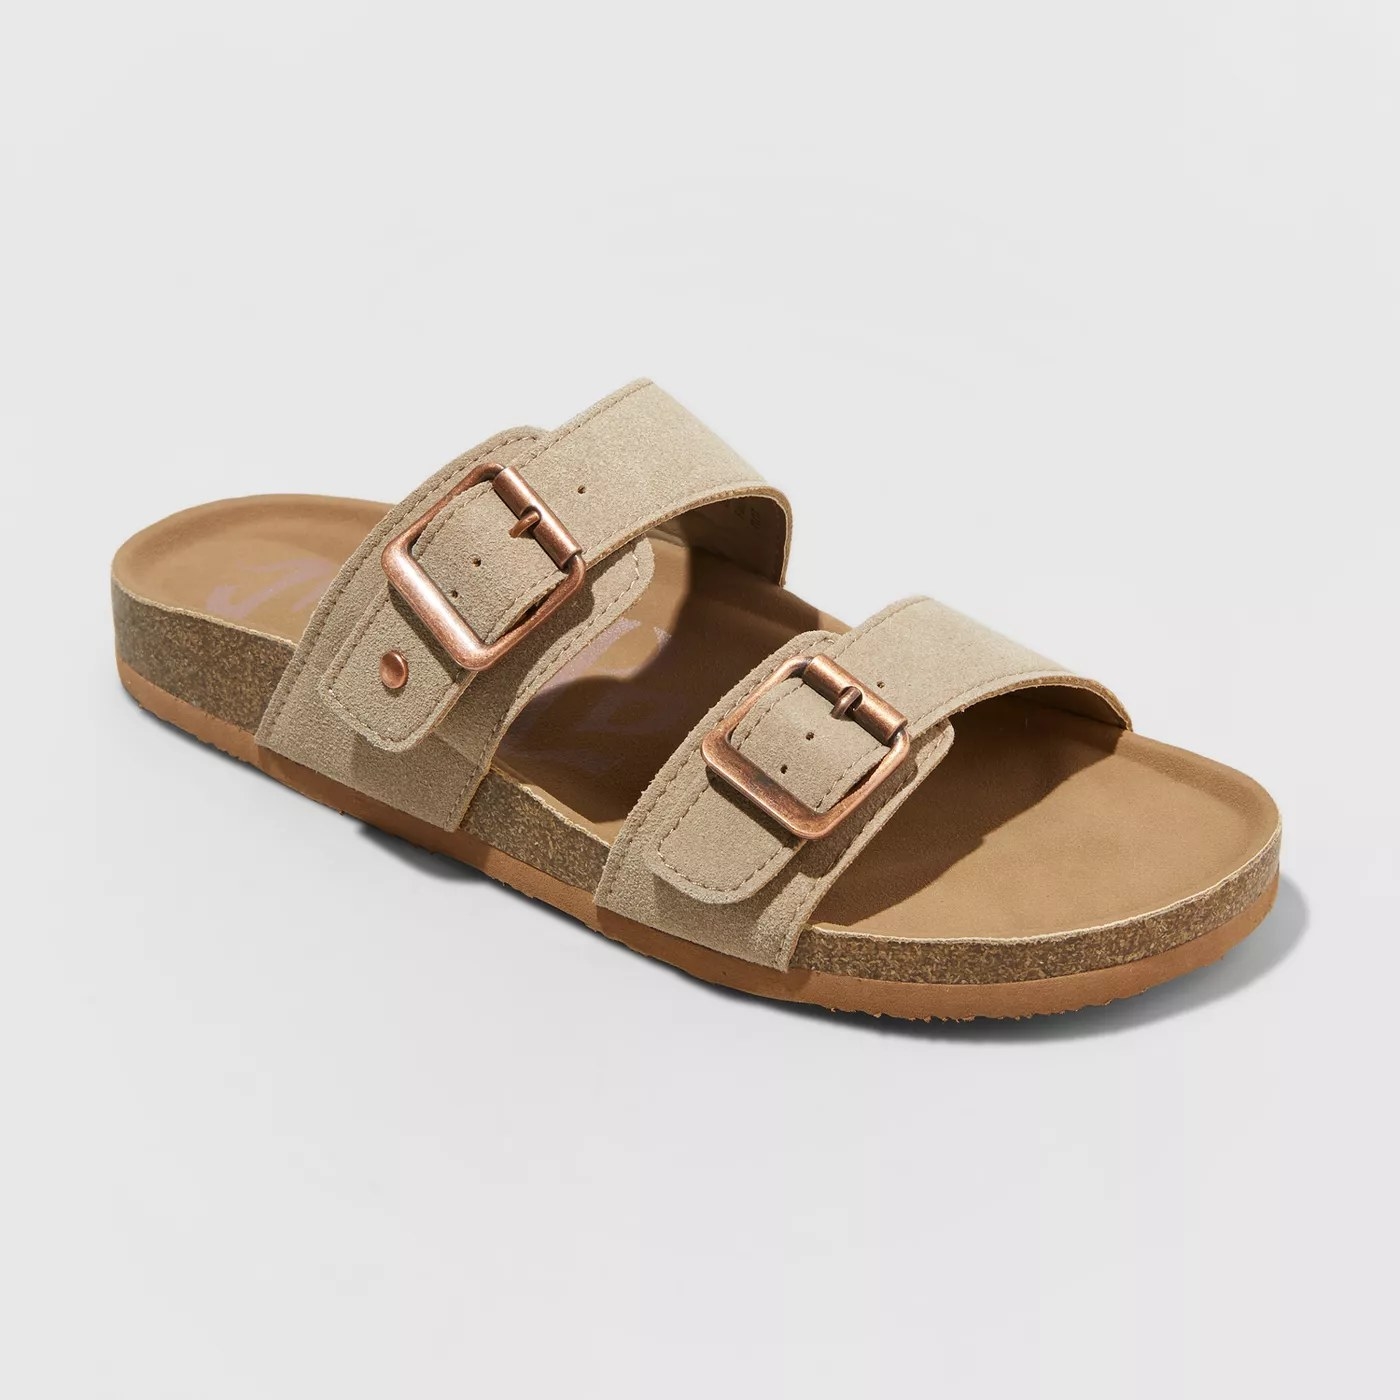 The sandals in taupe